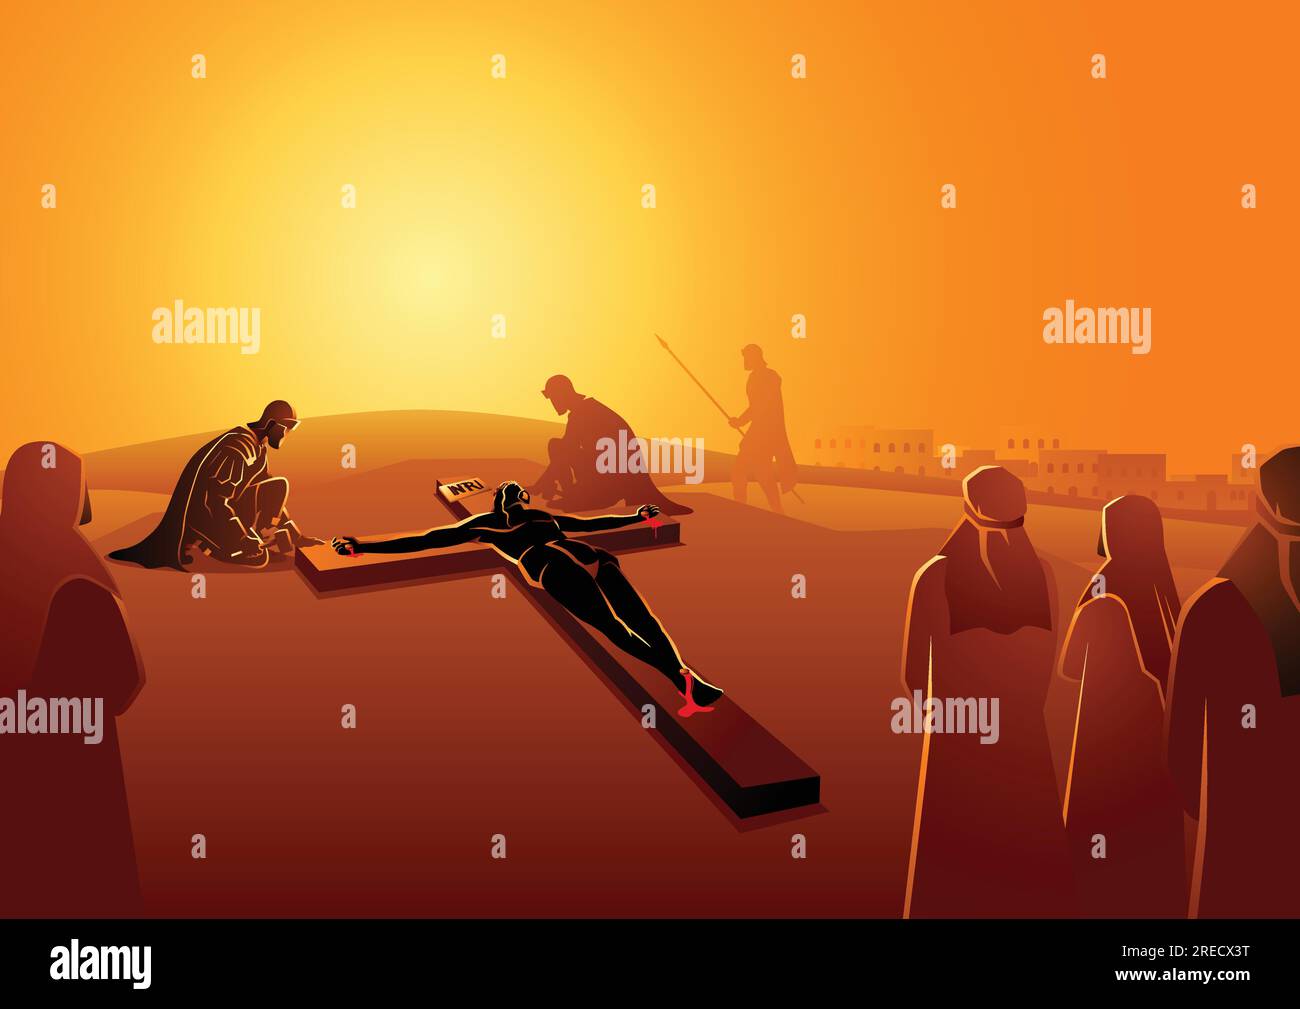 Biblical vector illustration series. Way of the Cross or Stations of the Cross, eleventh station, Jesus is Nailed To The Cross. Stock Vector